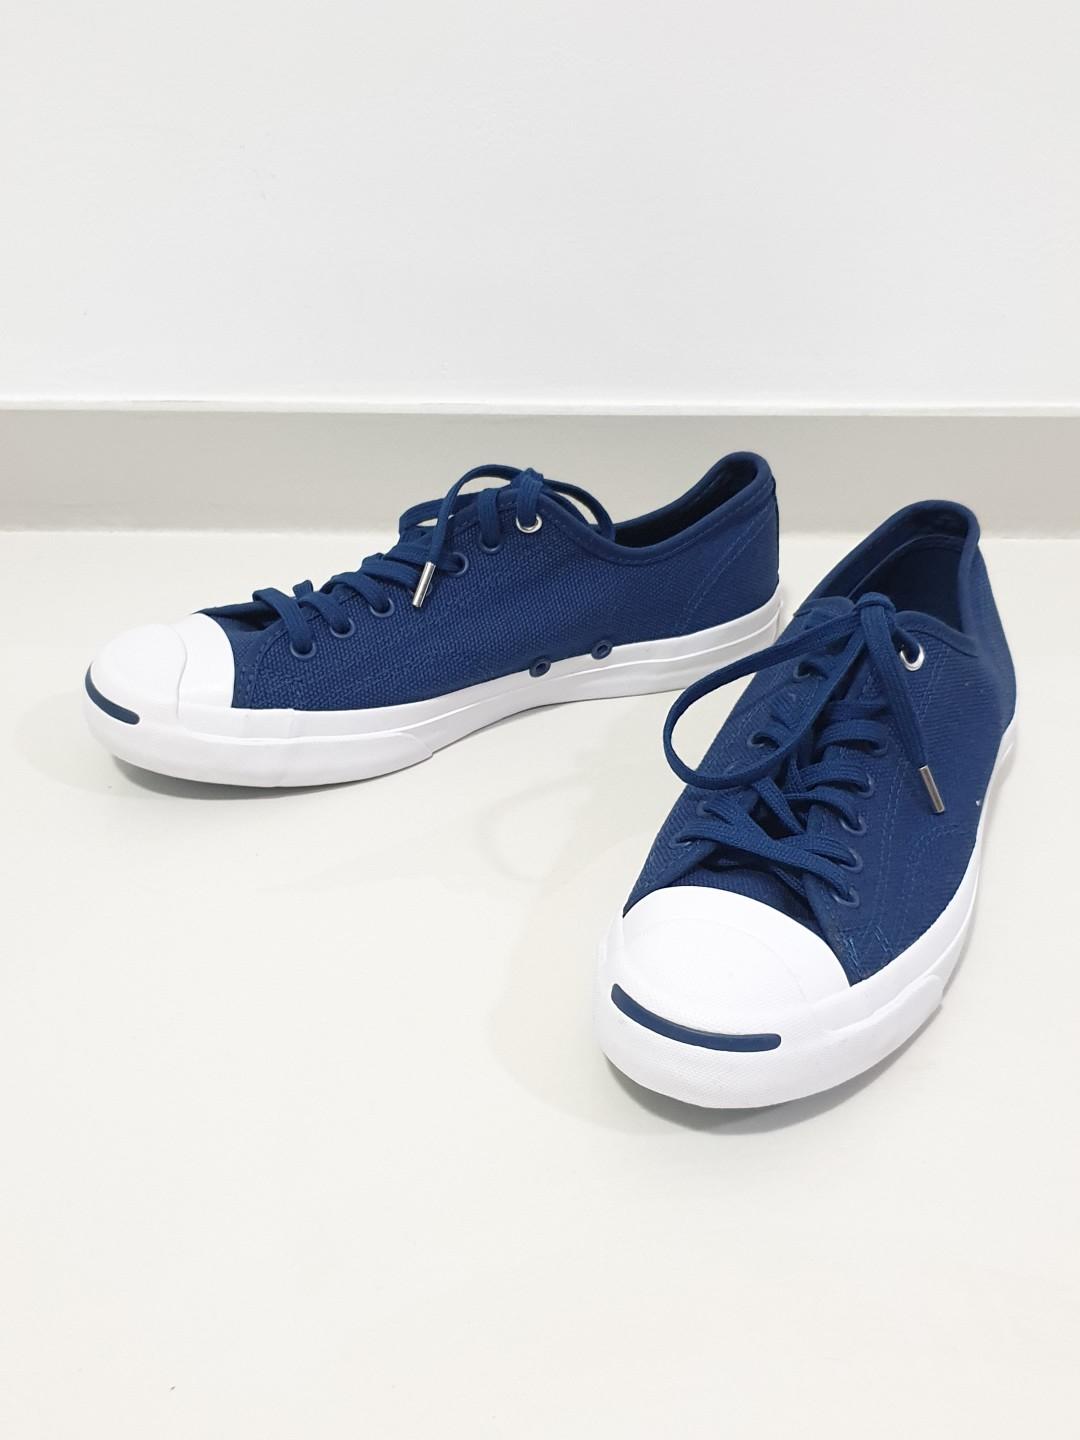 converse jack purcell jack ox canvas sneaker